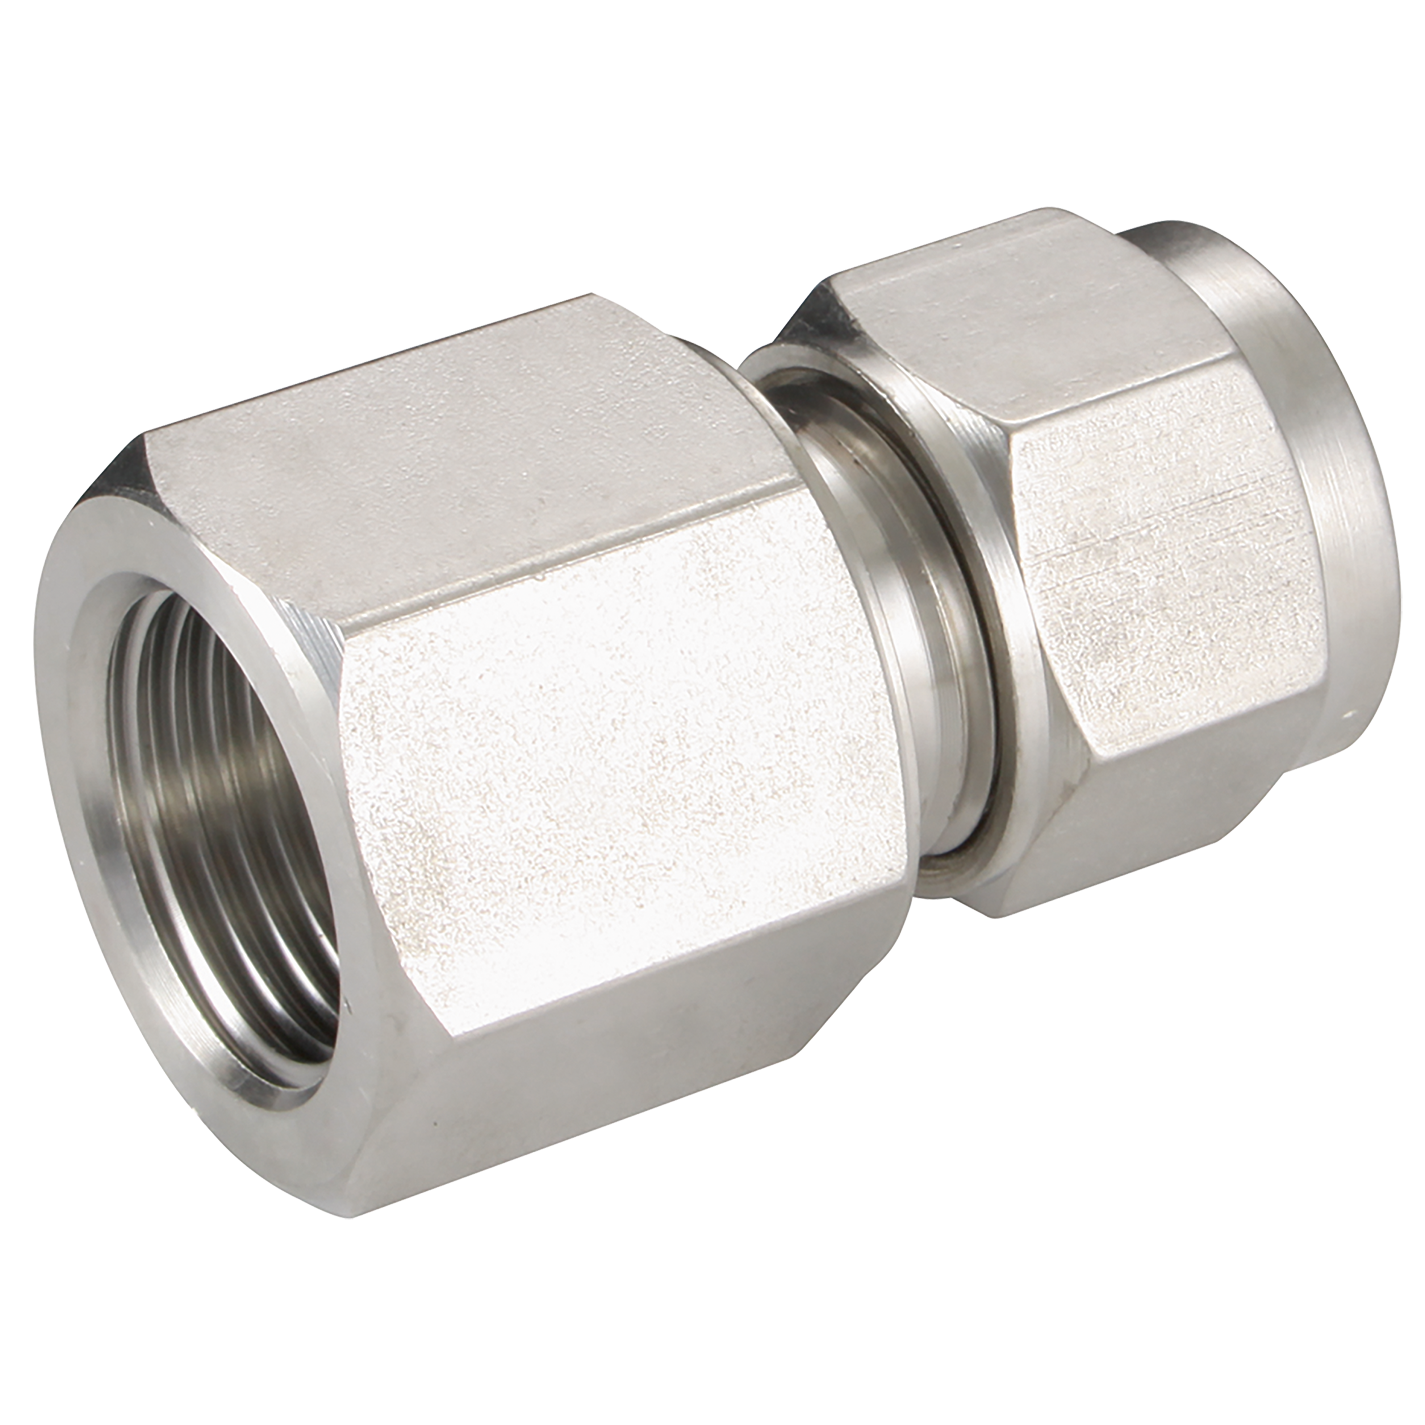 FEMALE CONNECTOR 8 OD 1/2 BSPP